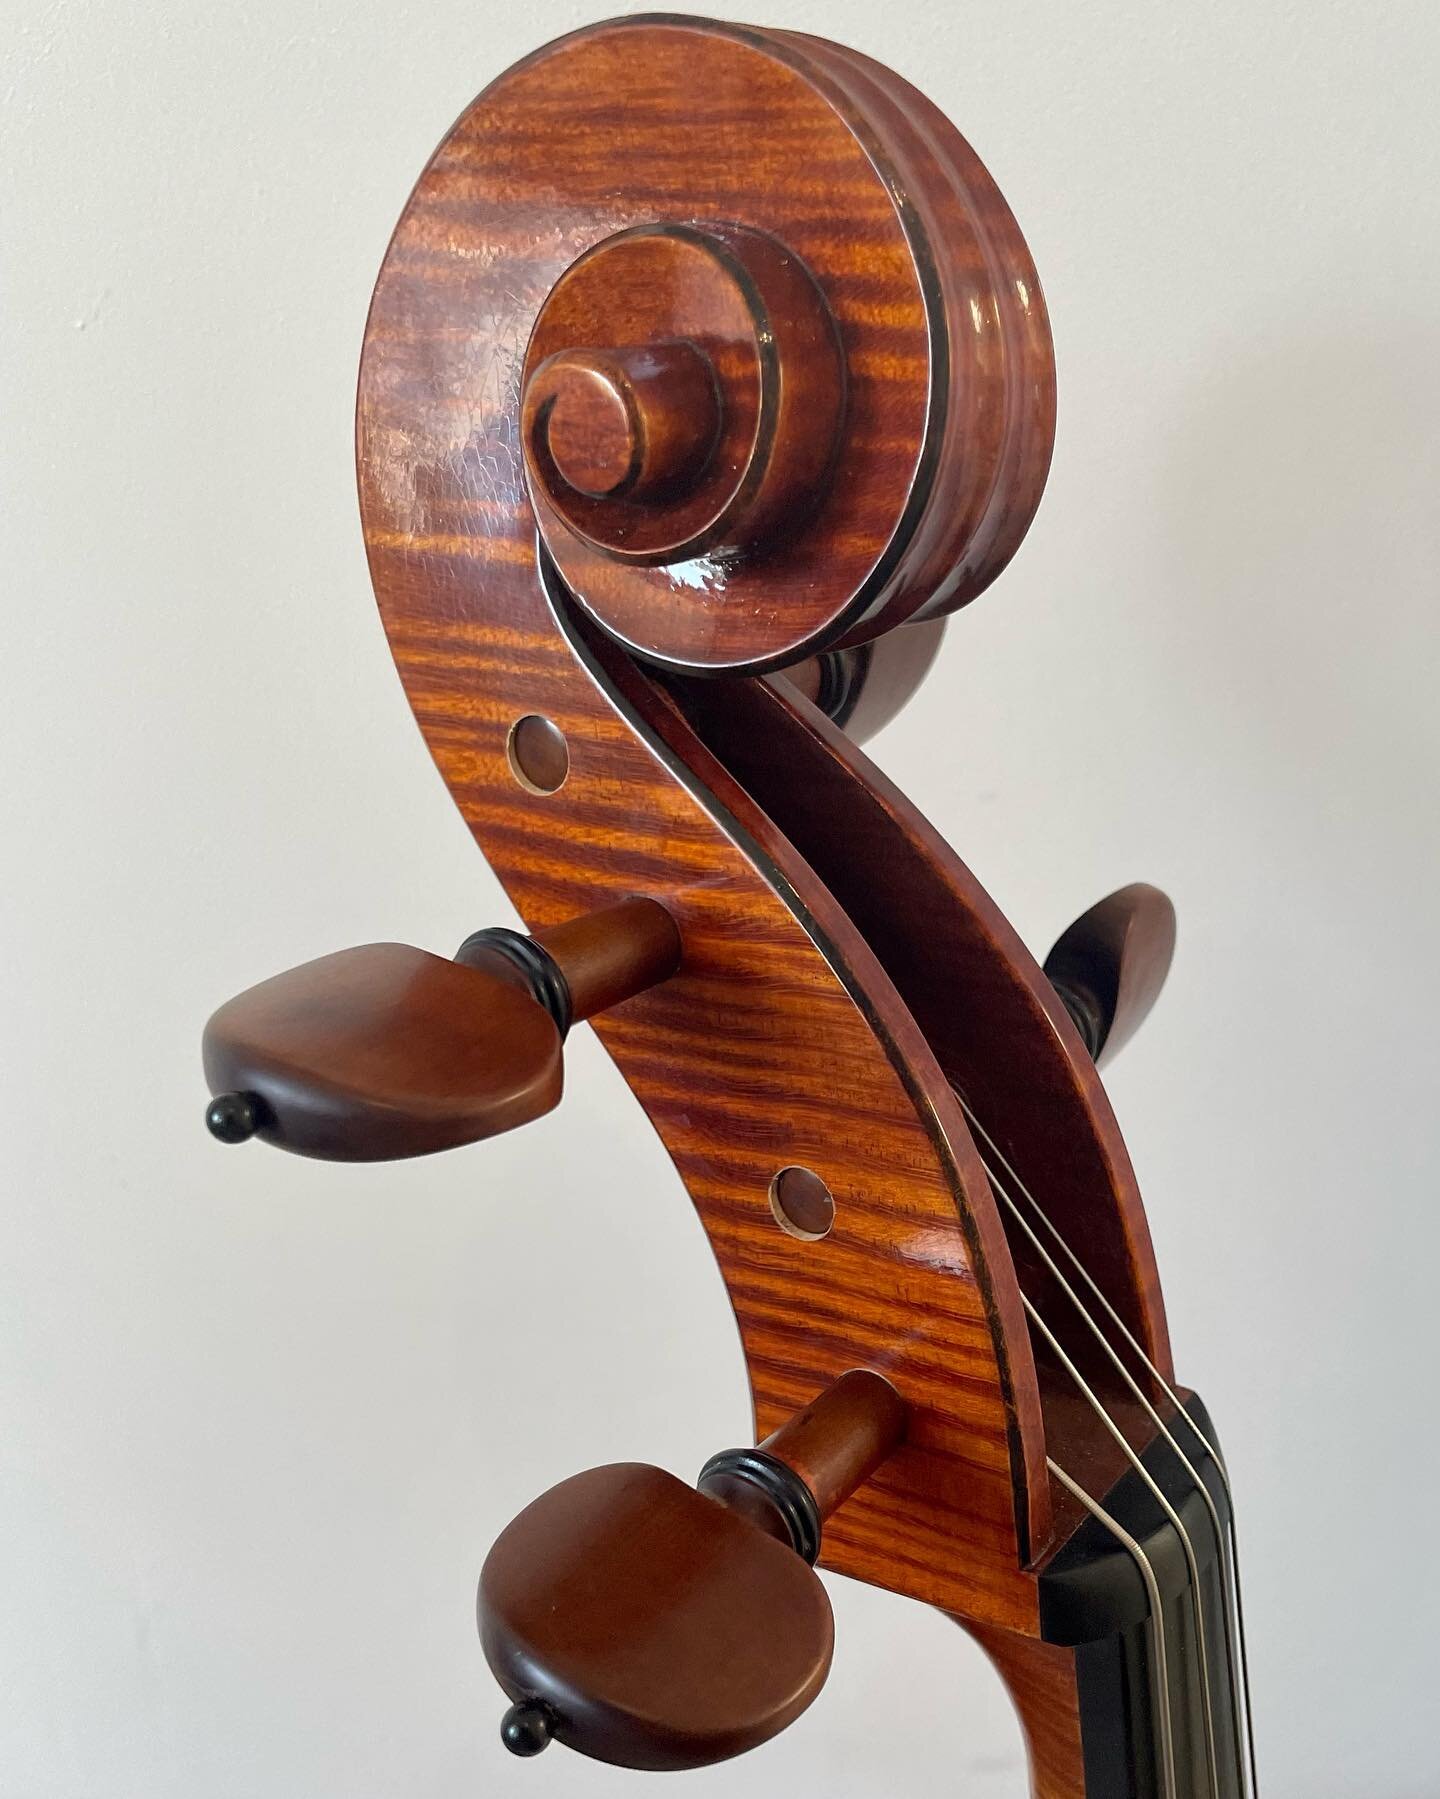 A new set of Crowson pegs in stained boxwood for this stunning prize winning cello by Frank Ravatin et al. Paired with a superb Chan model flamed boxwood tailpiece by Alexander Accessories.
Musical instrument making at the highest level.

#cello #cel